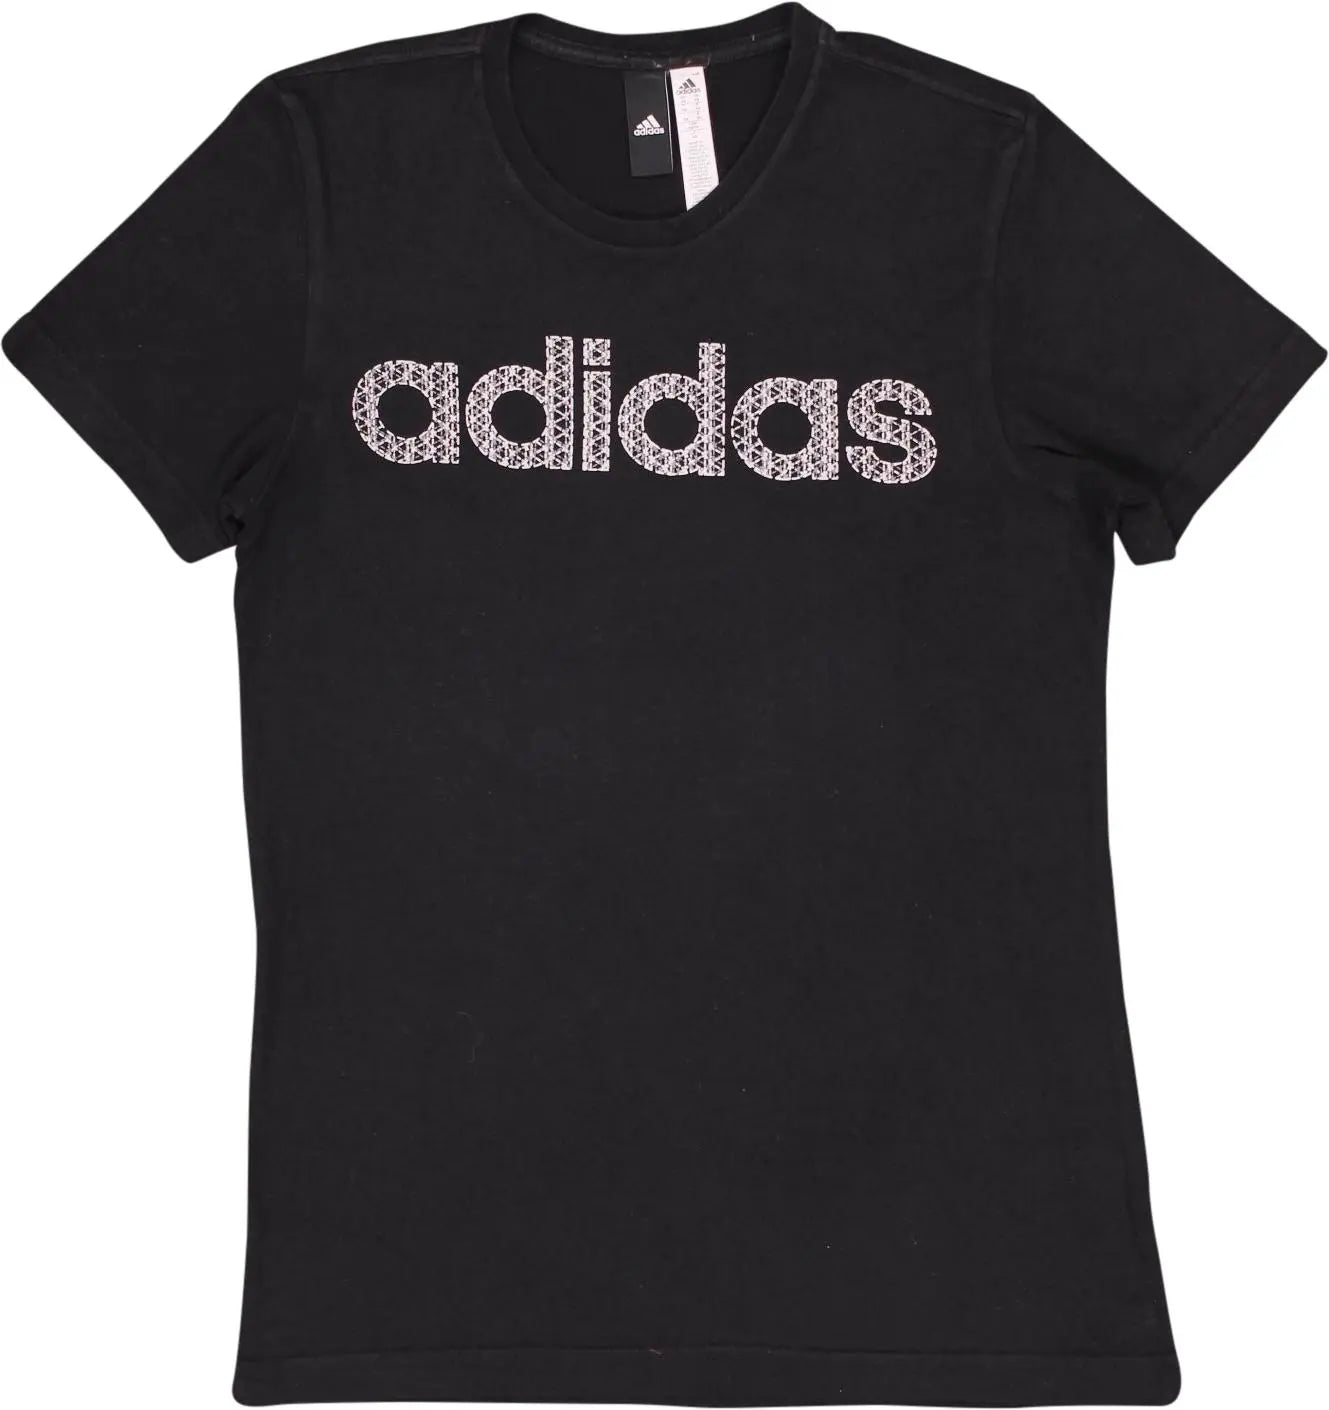 Adidas - Black T-shirt by Adidas- ThriftTale.com - Vintage and second handclothing